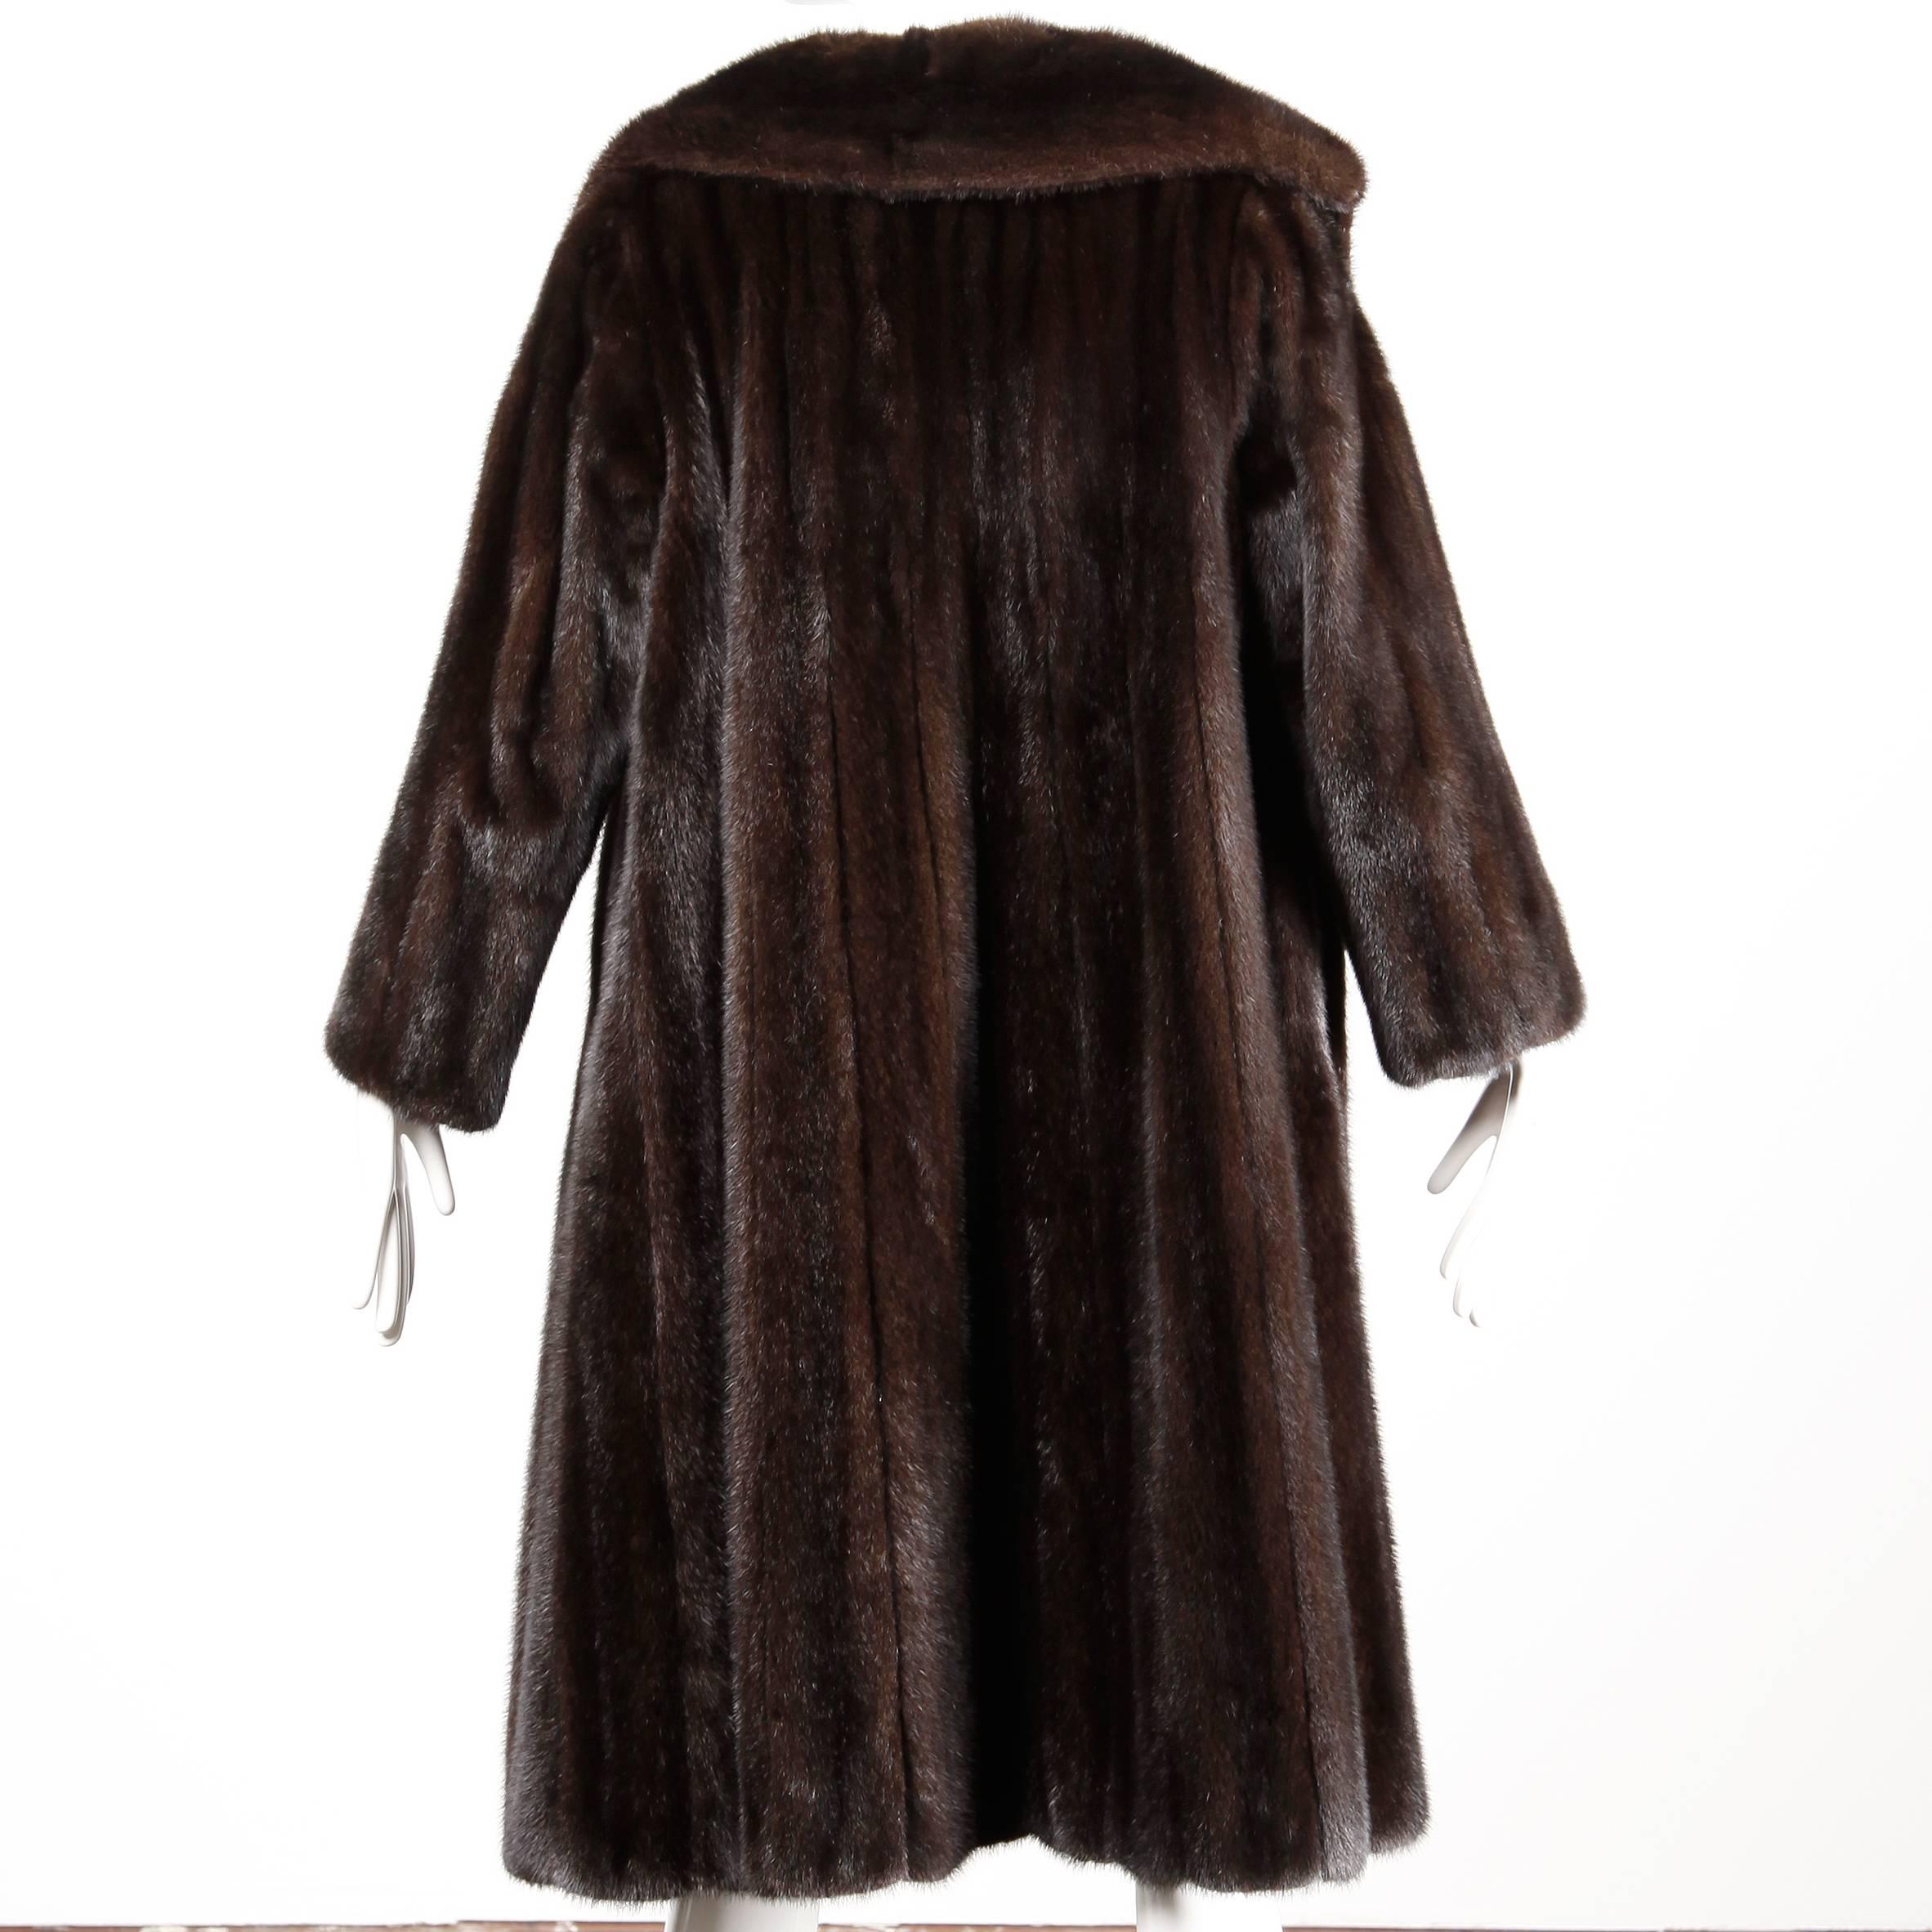 Absolutely flawless and pristine mink fur coat by Black Willow for Neiman Marcus. This coat is a custom design and features a numbered label. The pelts are in beautiful condition and are soft and supple. The original owner kept this in cold storage